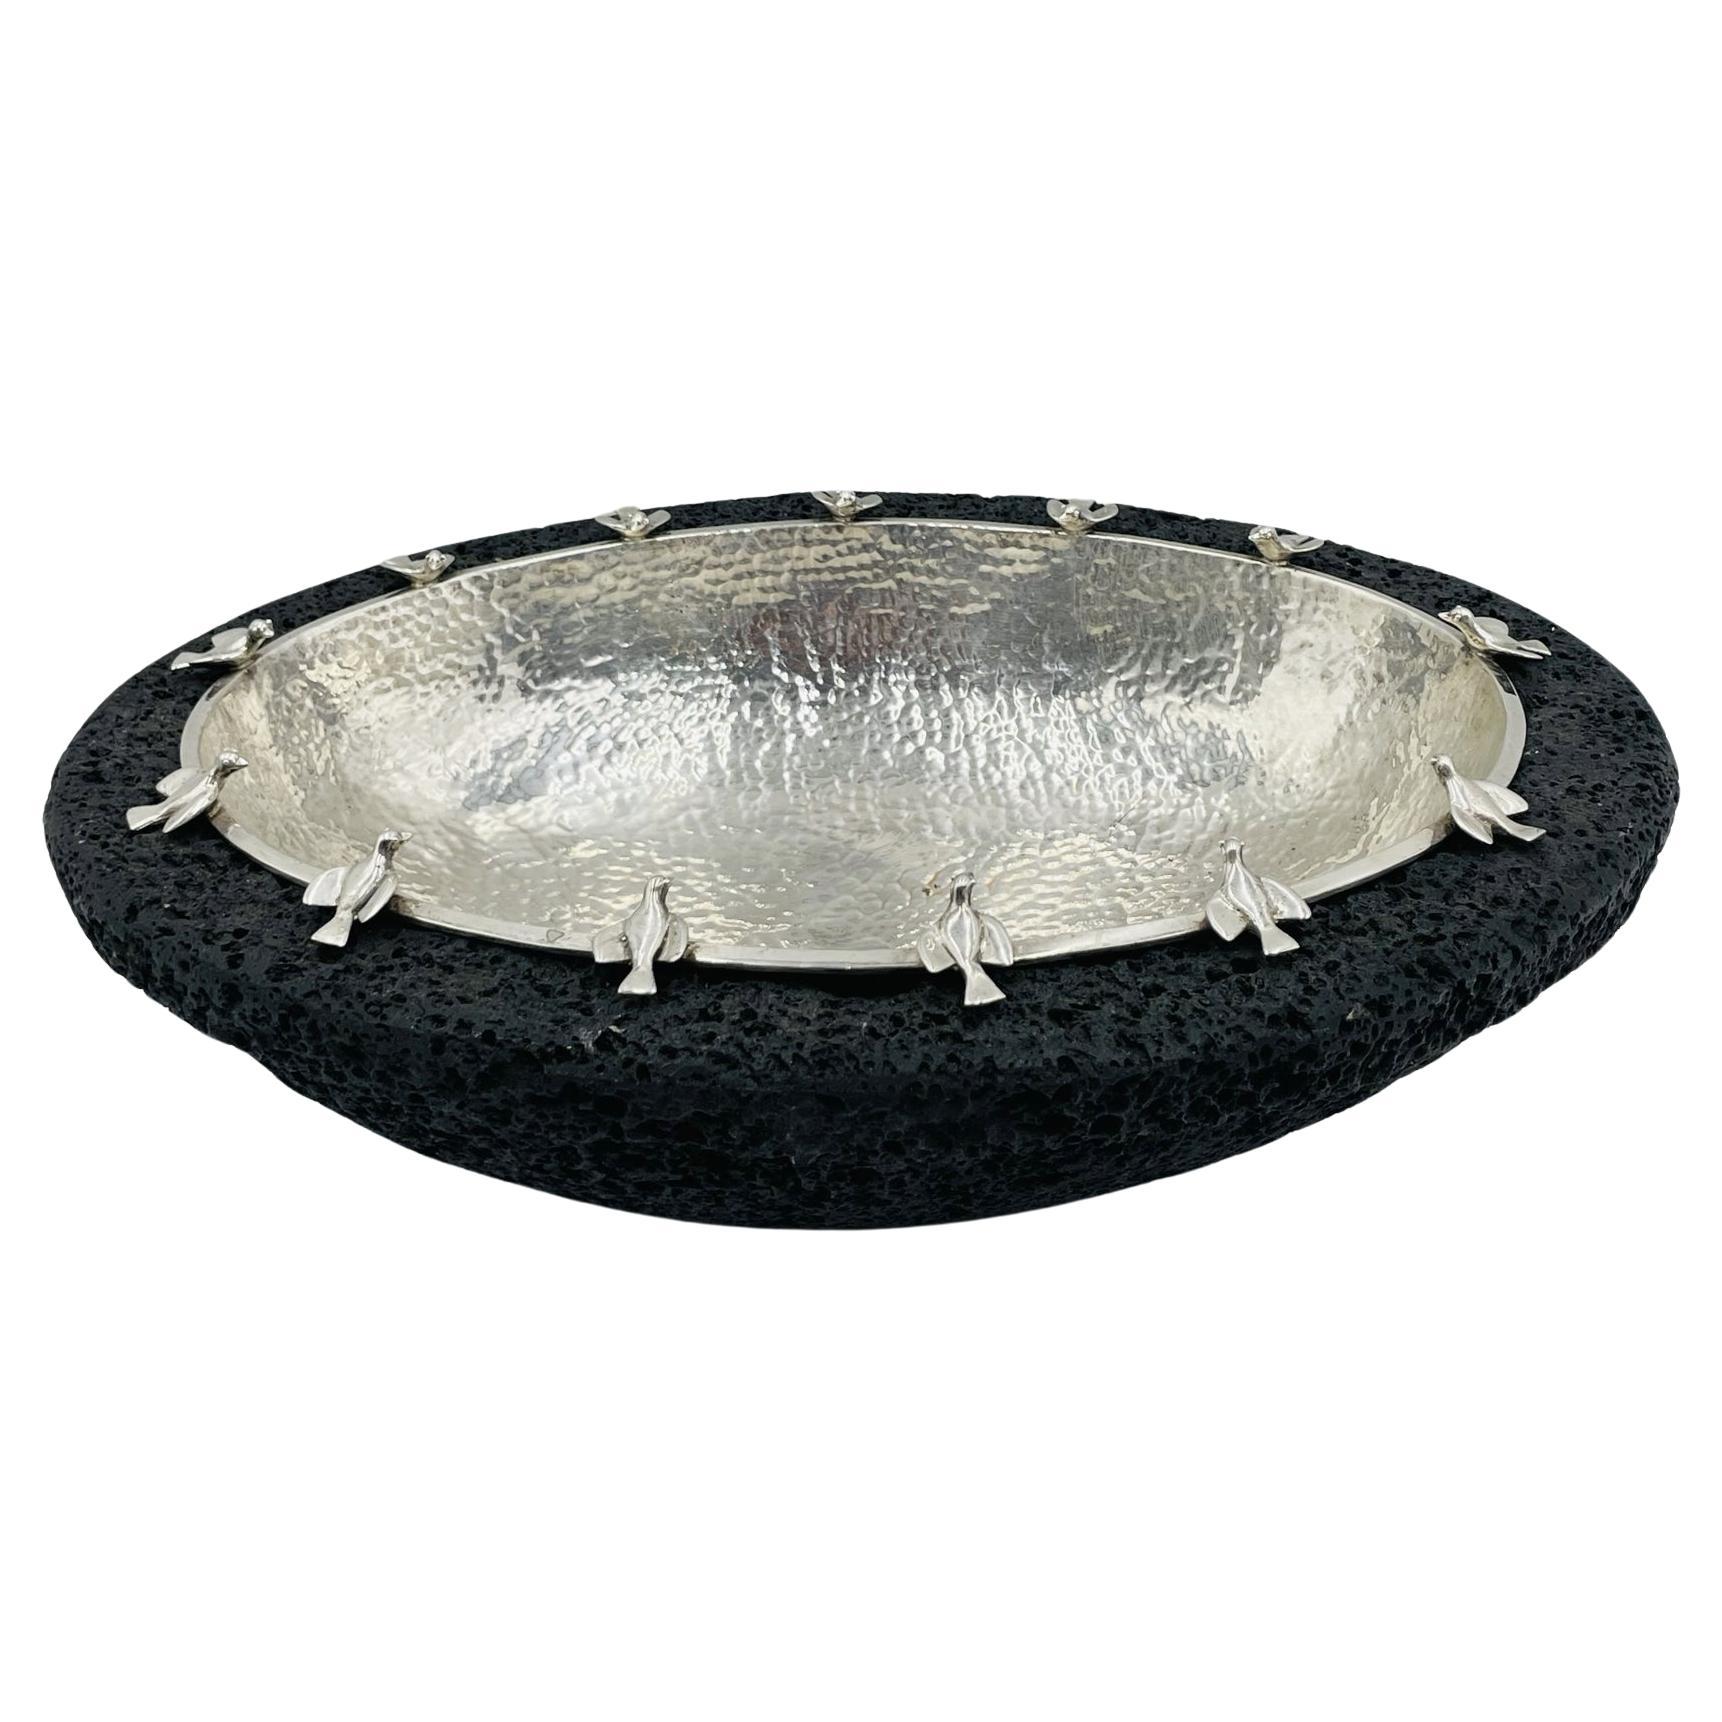 Silver-Plate Bowl with Bird Detail on Volcanic Rock baseby Emilia Castillo For Sale